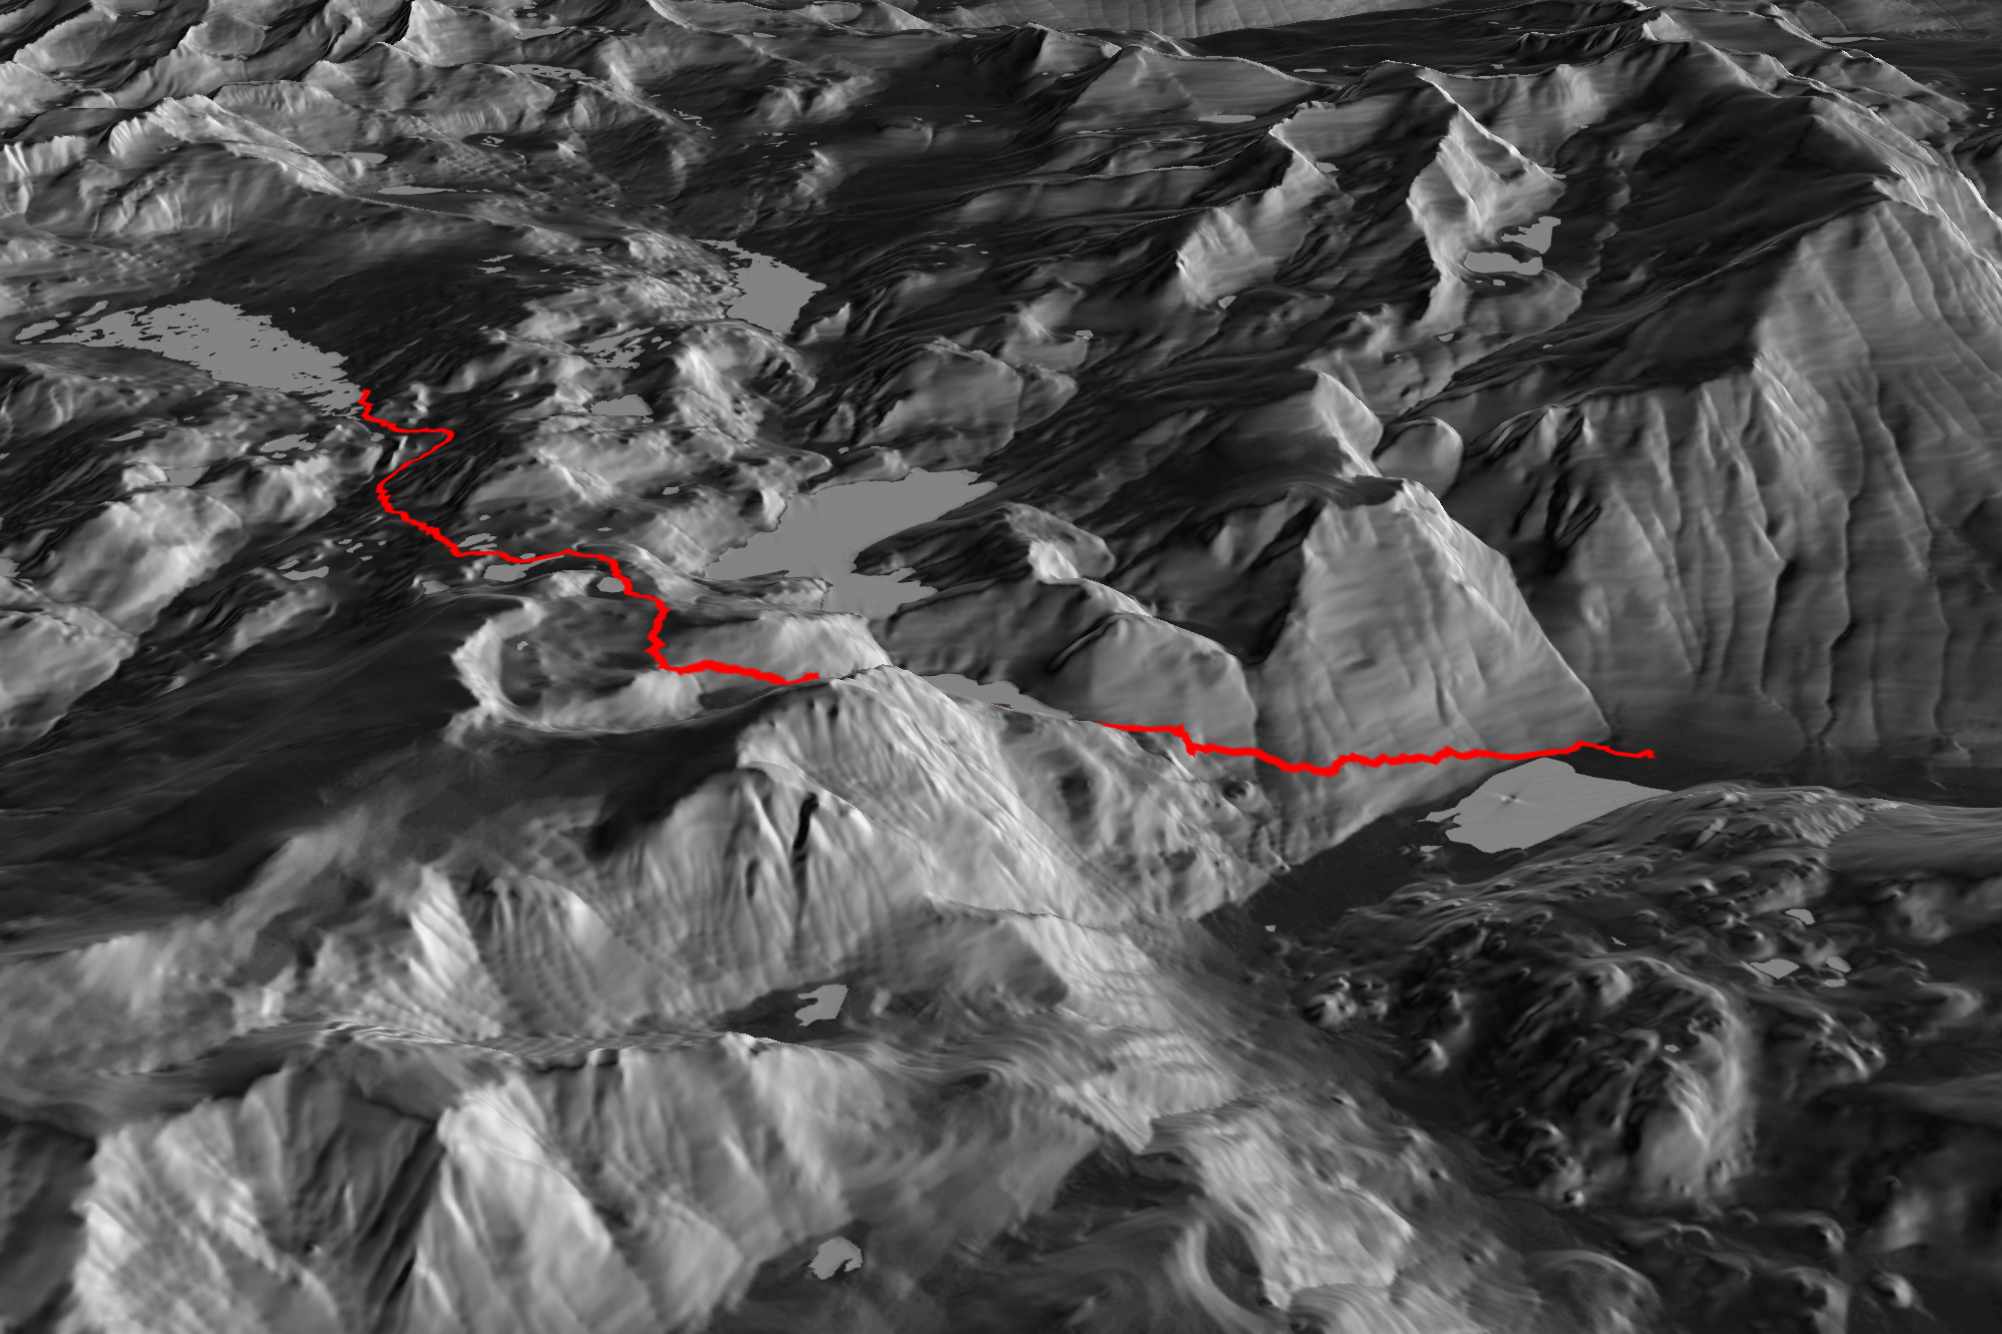 Our route up to Thousand Island Lake, traced with red